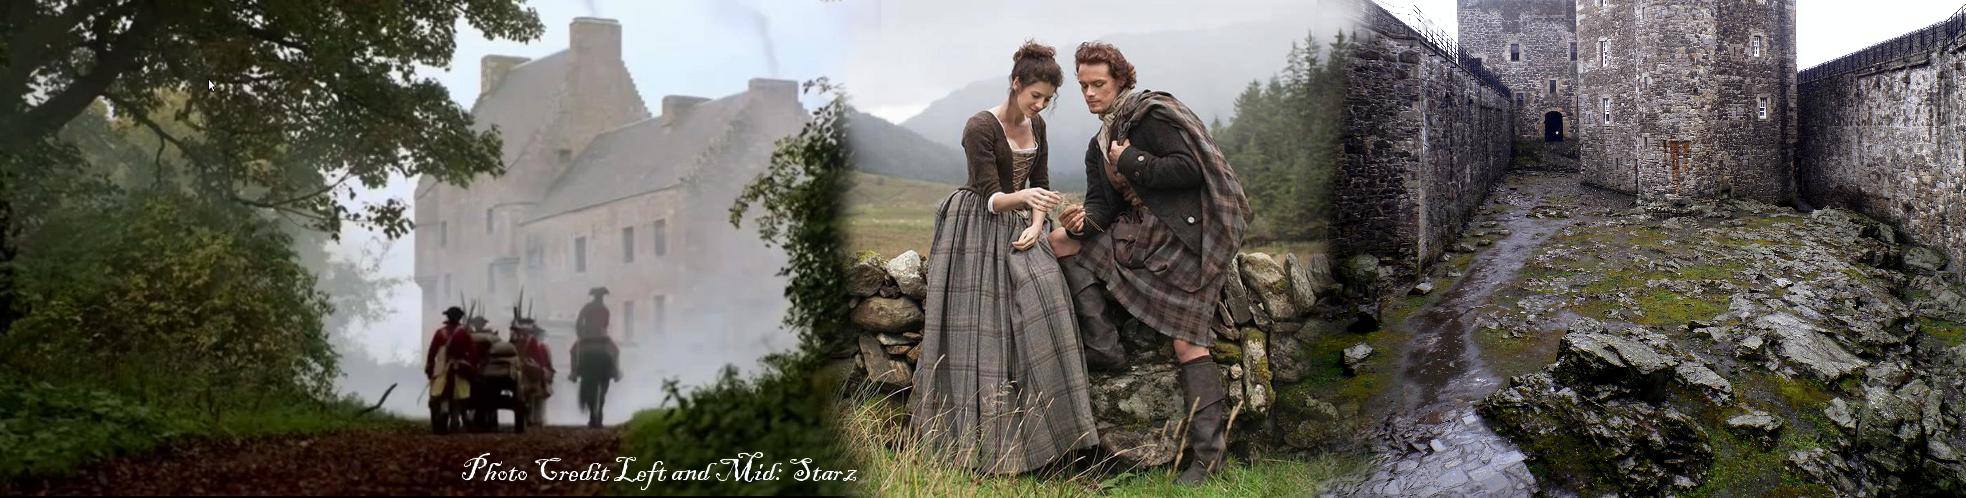 The Jamie and Claire Tour(TM) for Outlandish Spirits (TM)